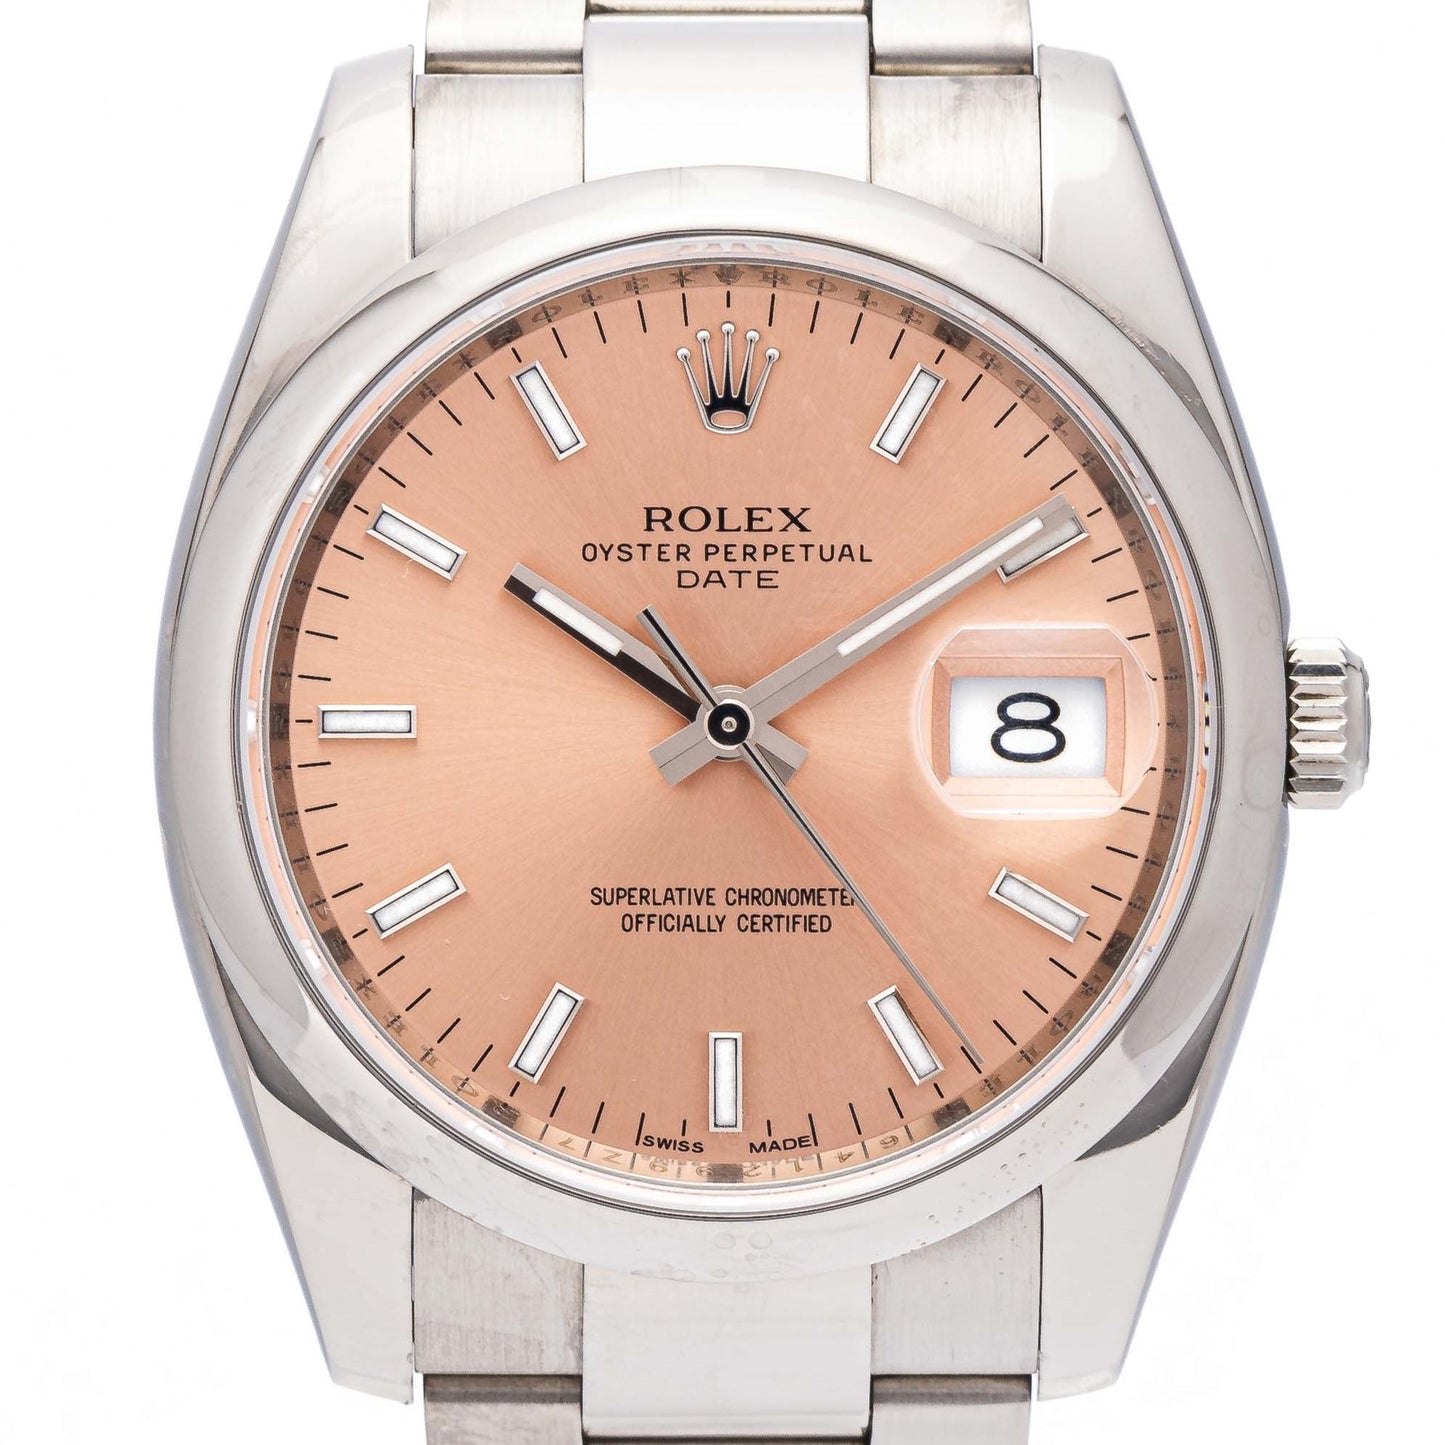 Rolex Oyster Perpetual Date 115200 rose dial